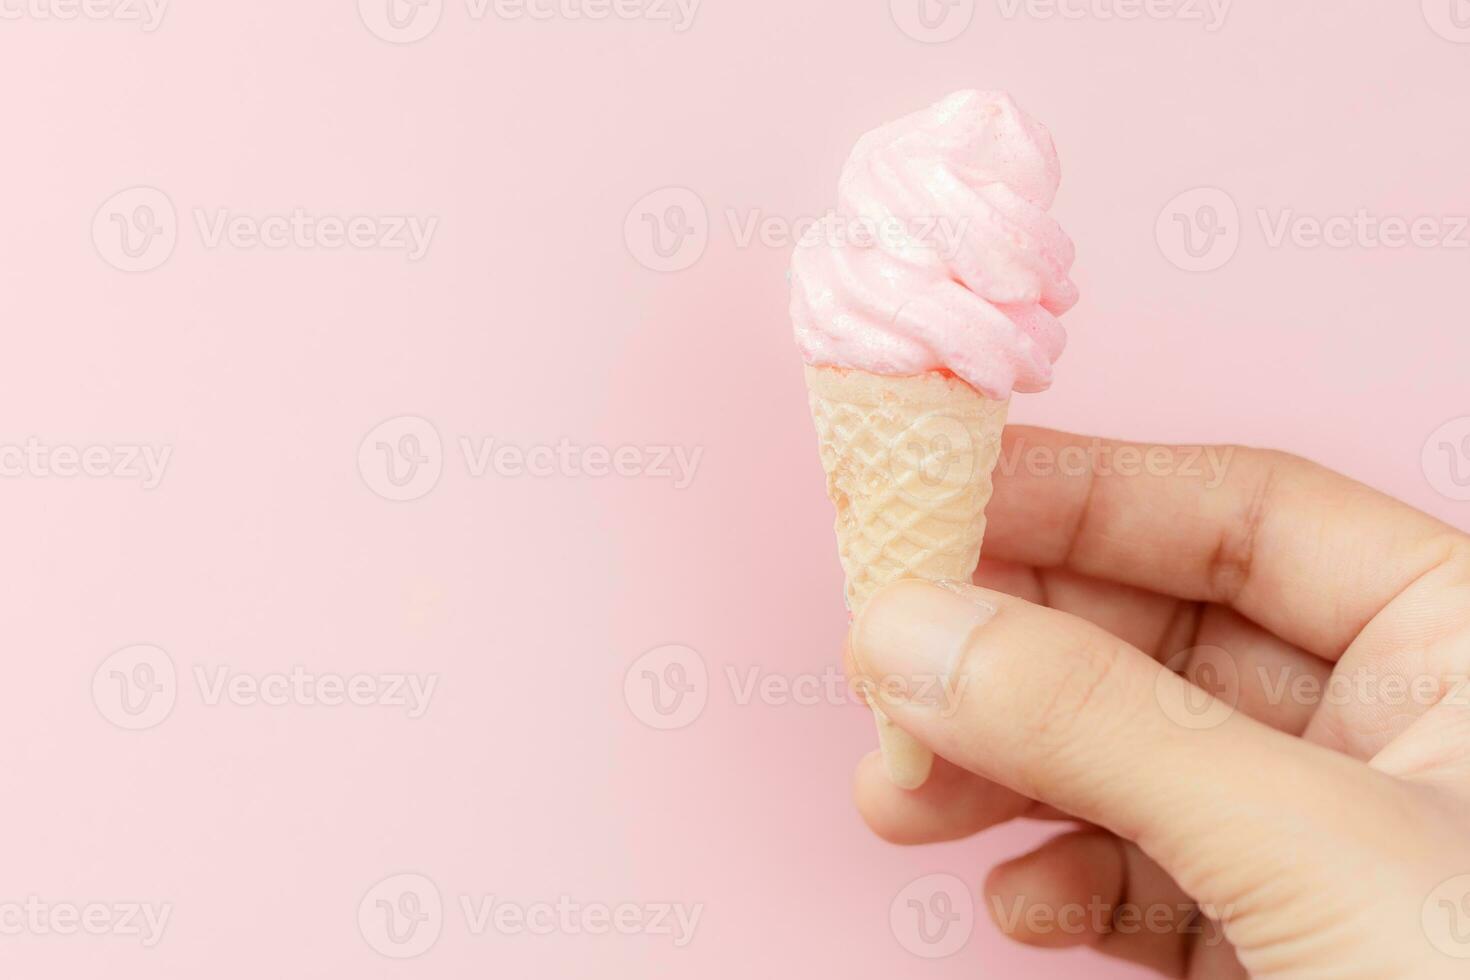 Woman's hand holding meringue ice cream cone on pink background photo